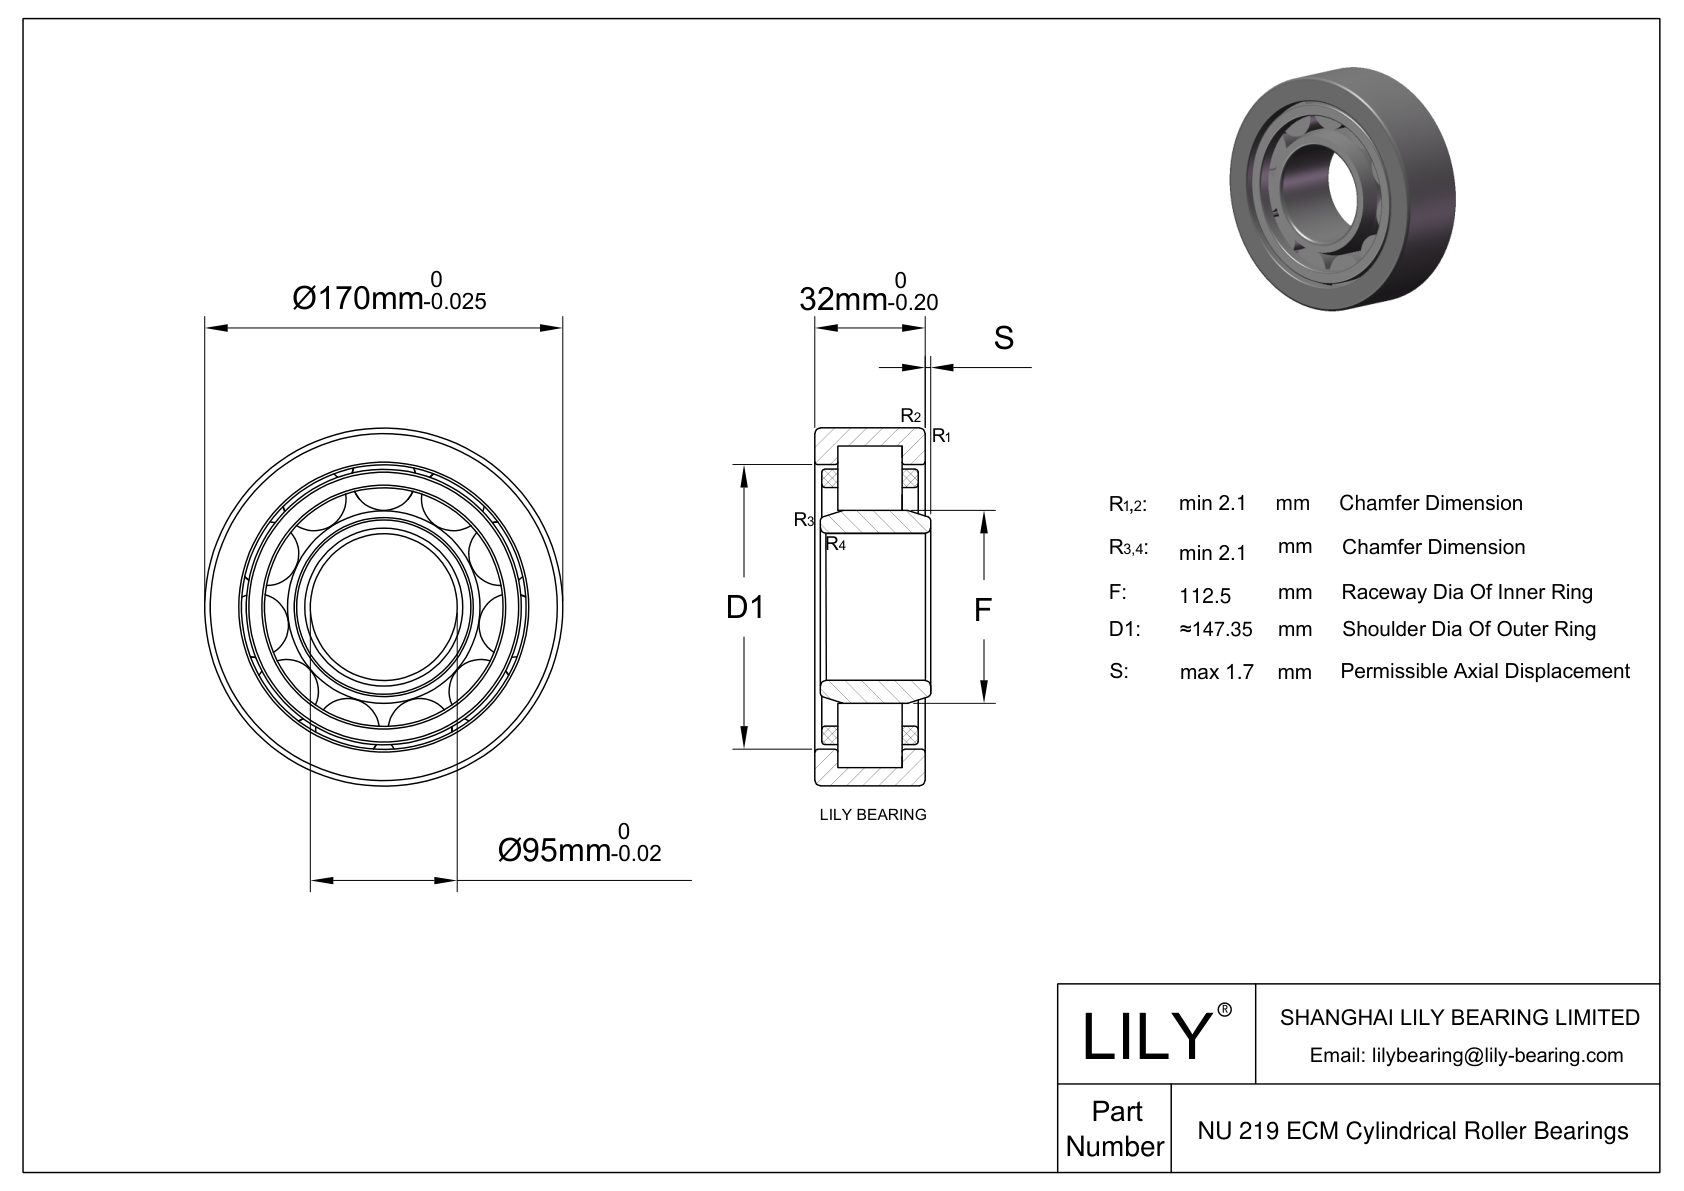 NU 219 ECM/C3VL0241 Ceramic Coated Cylindrical Roller Bearings cad drawing